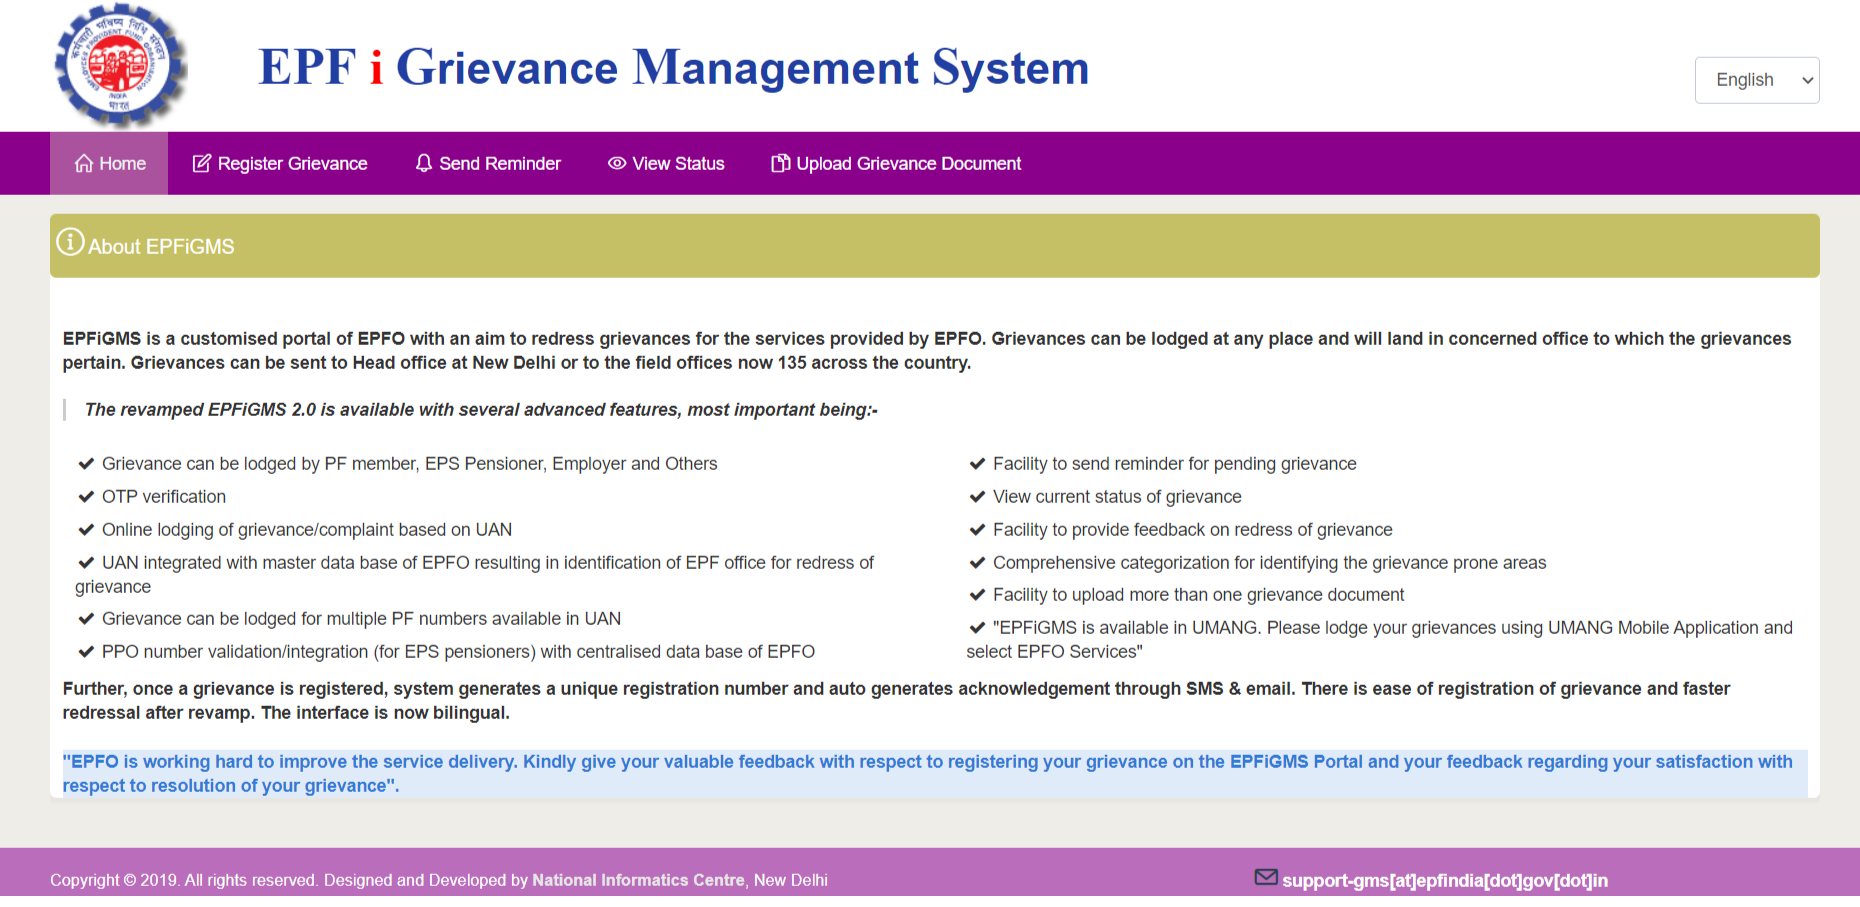 EPF Grievance Online at EPFO Complaint Portal epfigms.gov.in